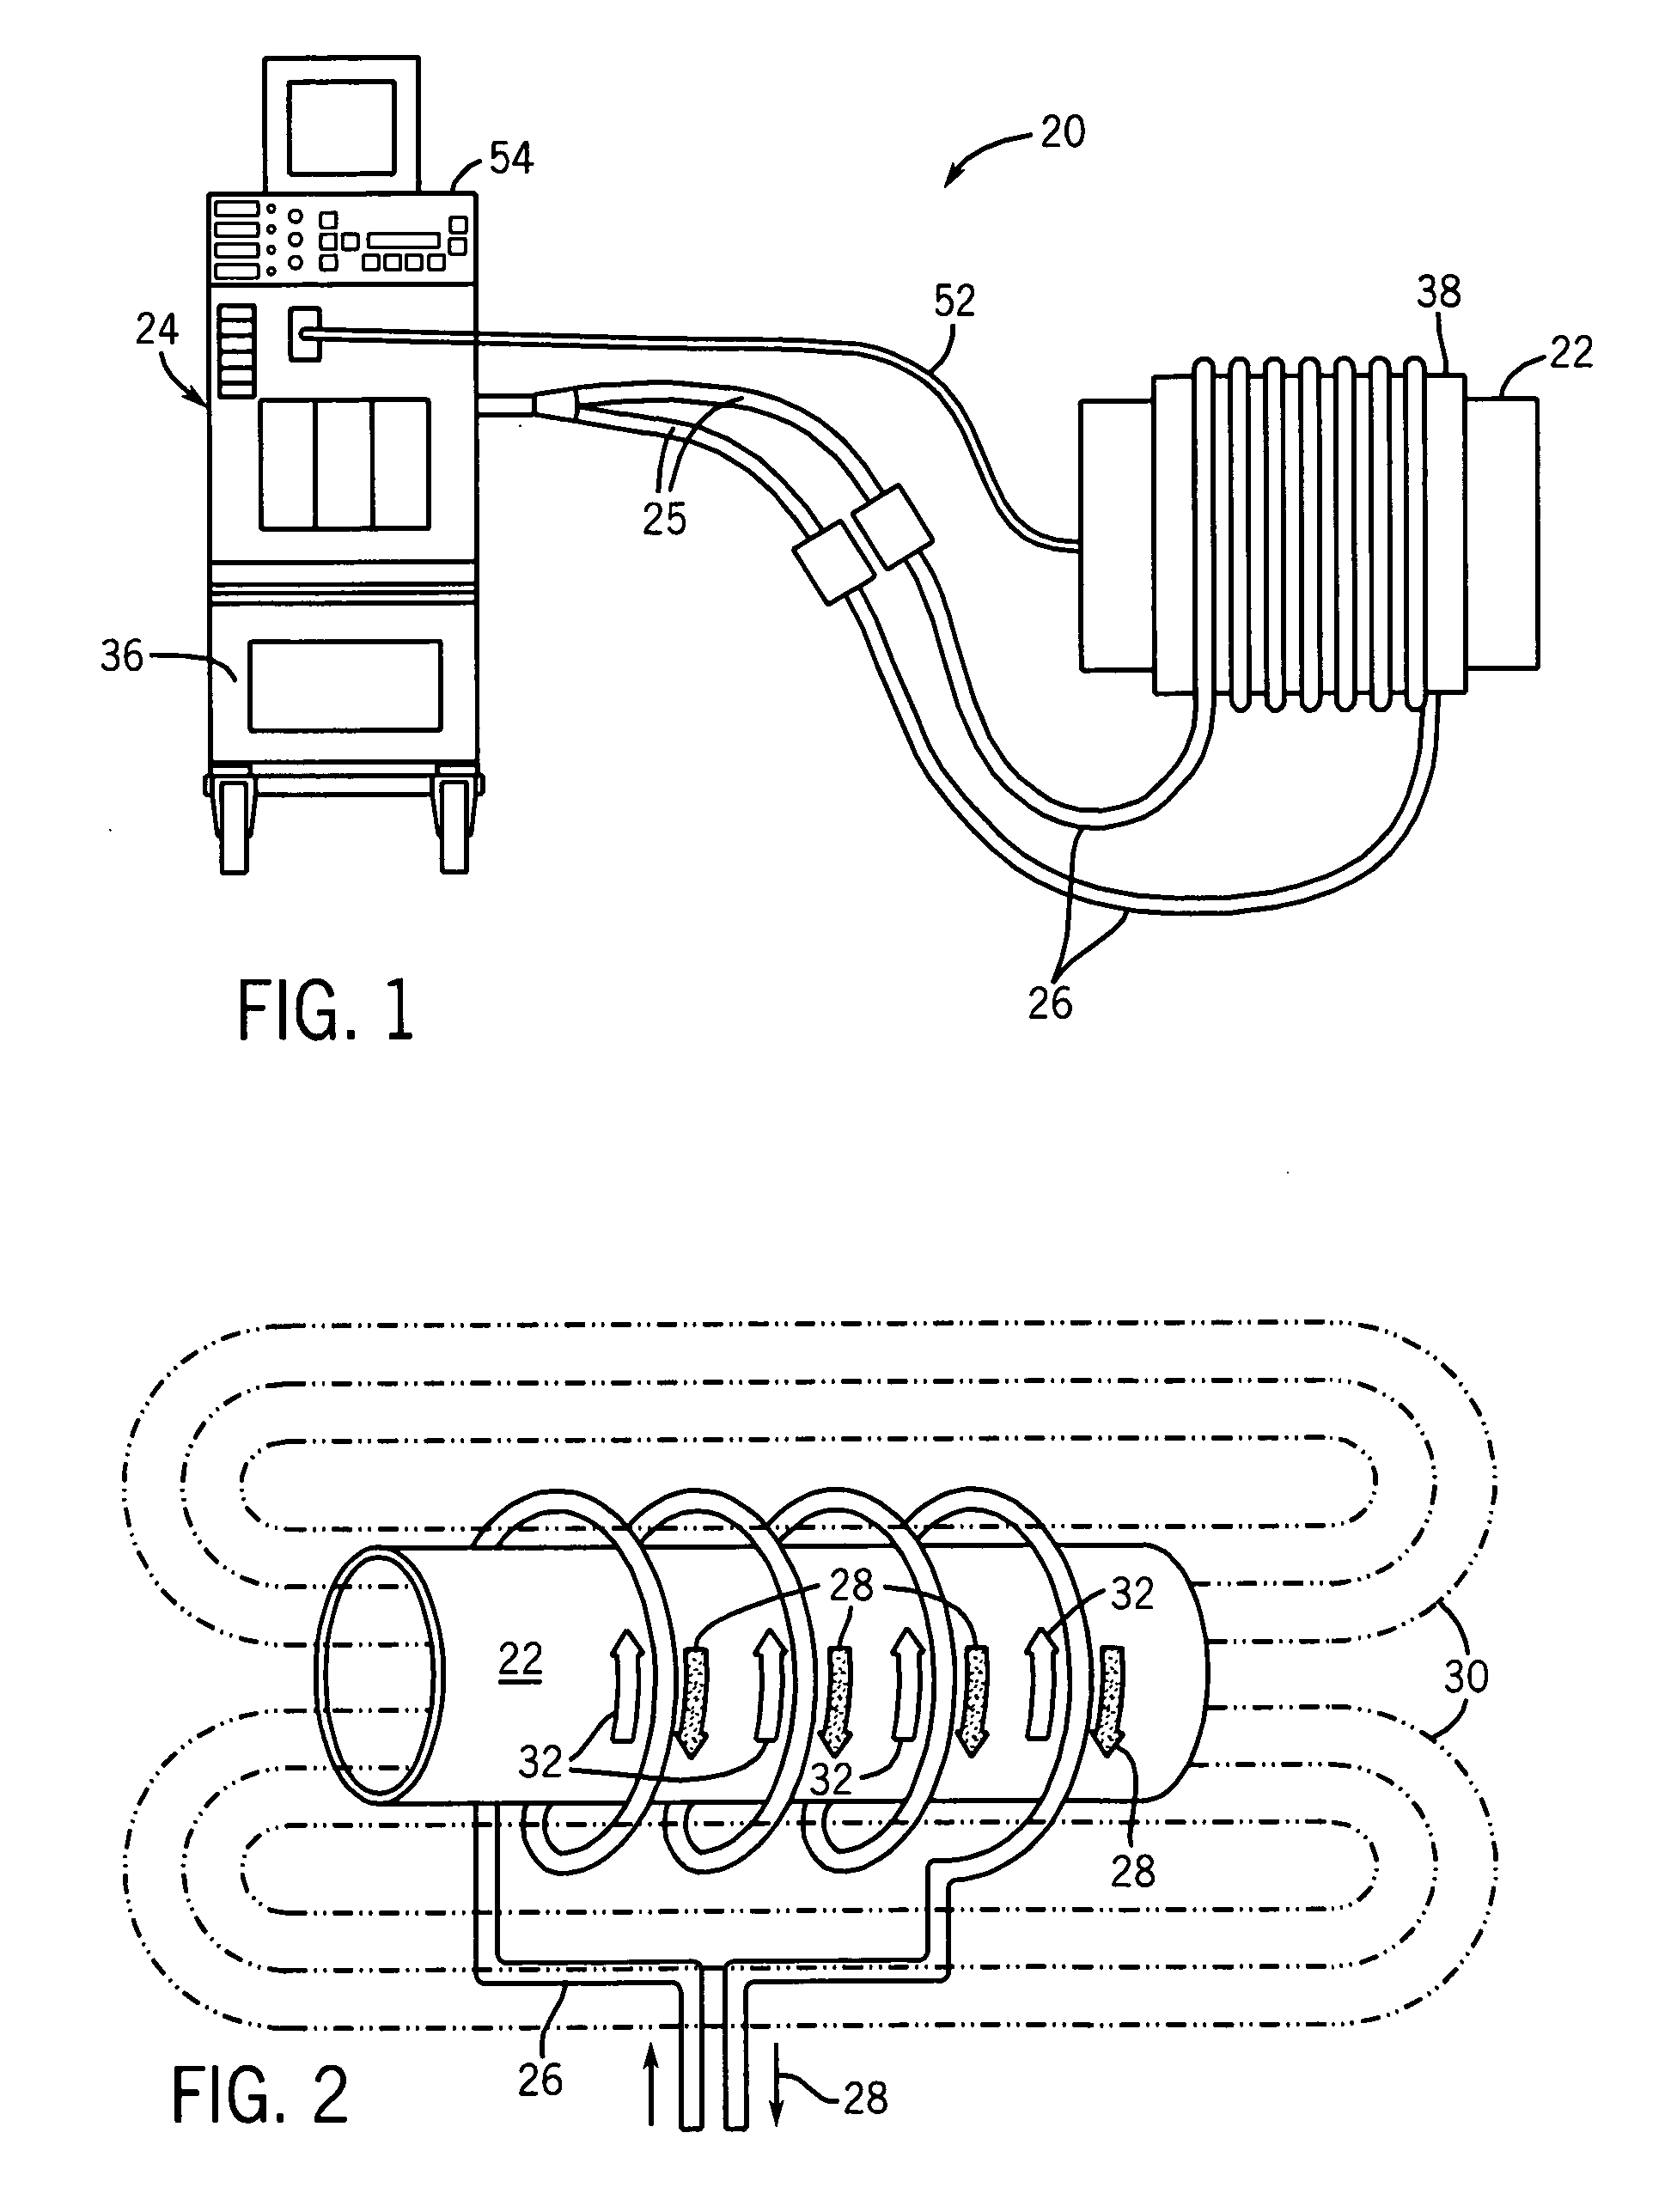 Induction heating system output control based on induction heating device